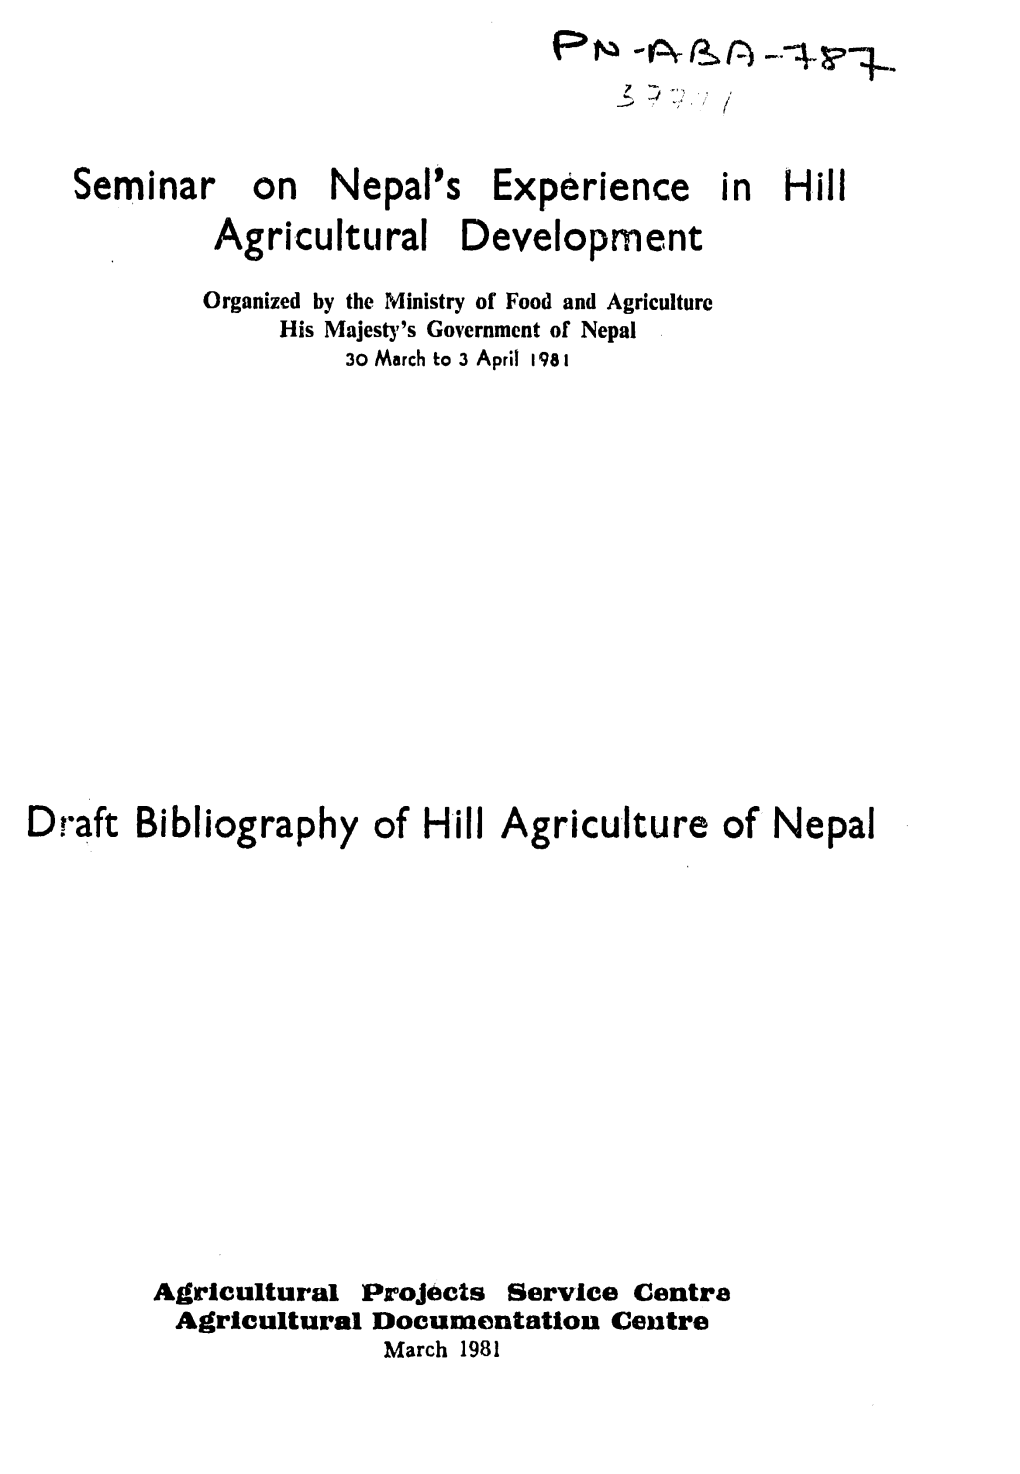 Seminar on Nepal's Experience in Hill Agricultural Development Draft Bibliography of Hill Agriculture of Nepal